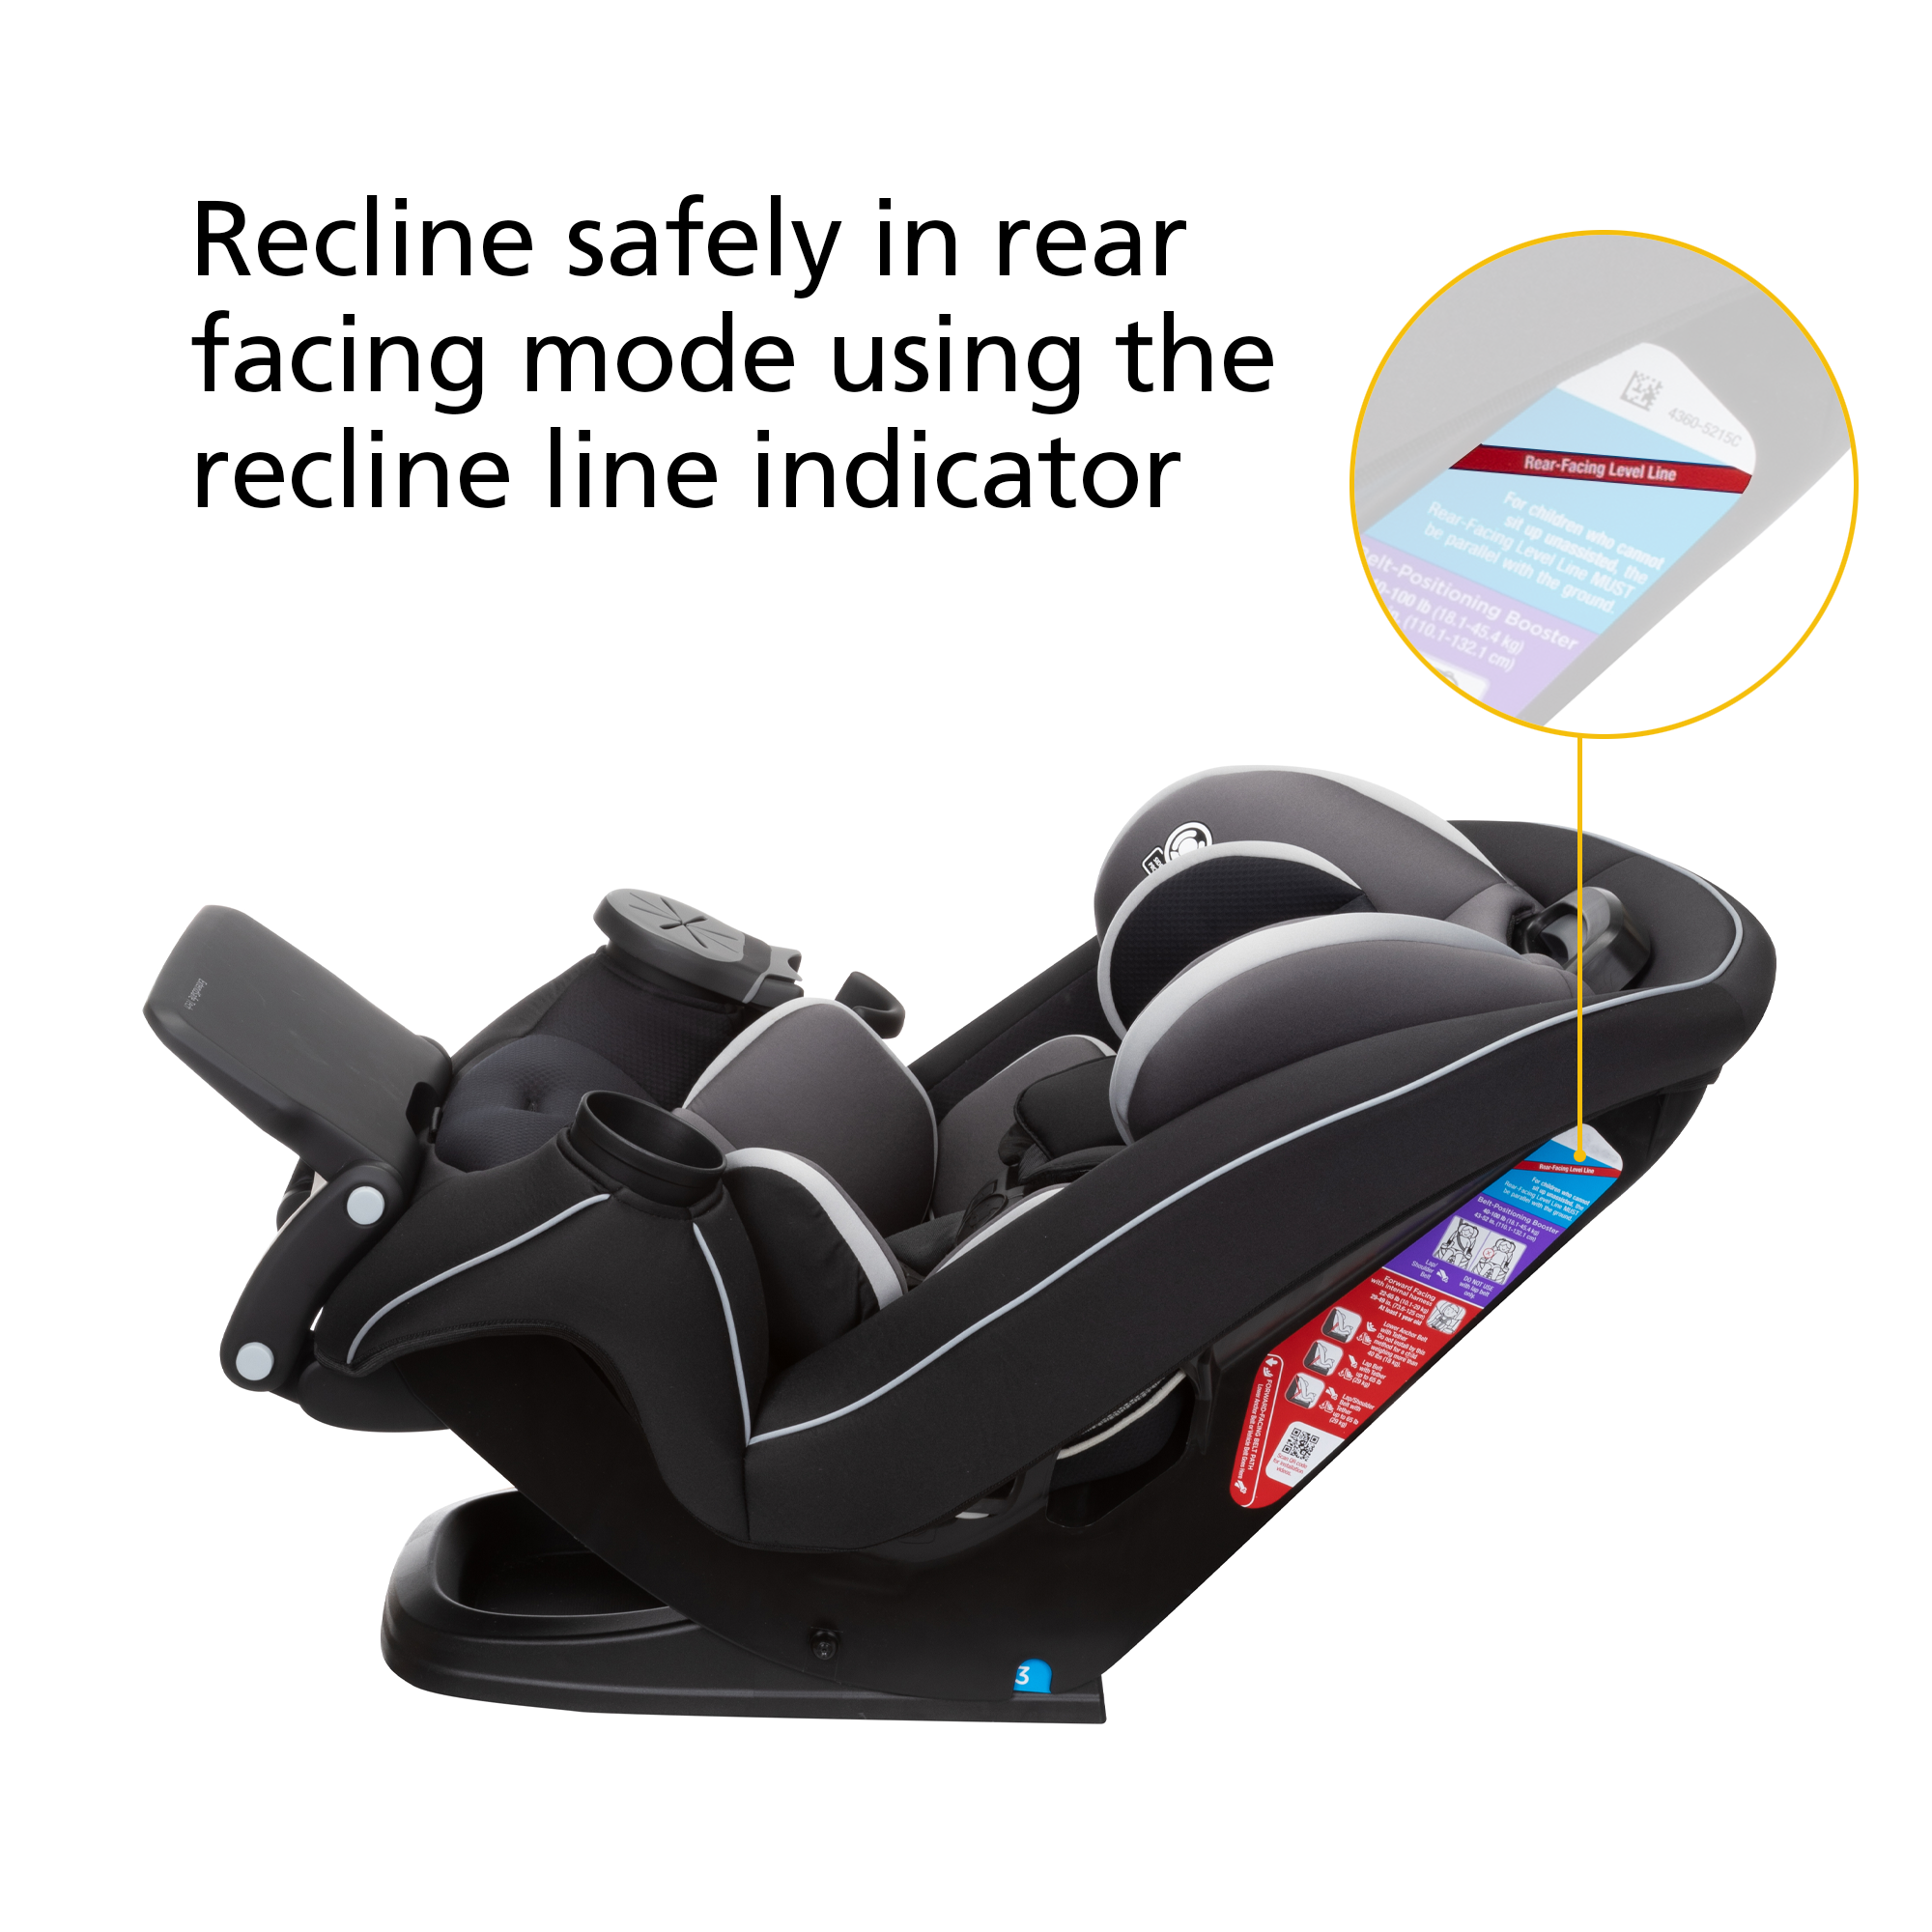 Grow and Go™ Extend 'n Ride LX - Recline safely in rear facing mode using the recline line indicator